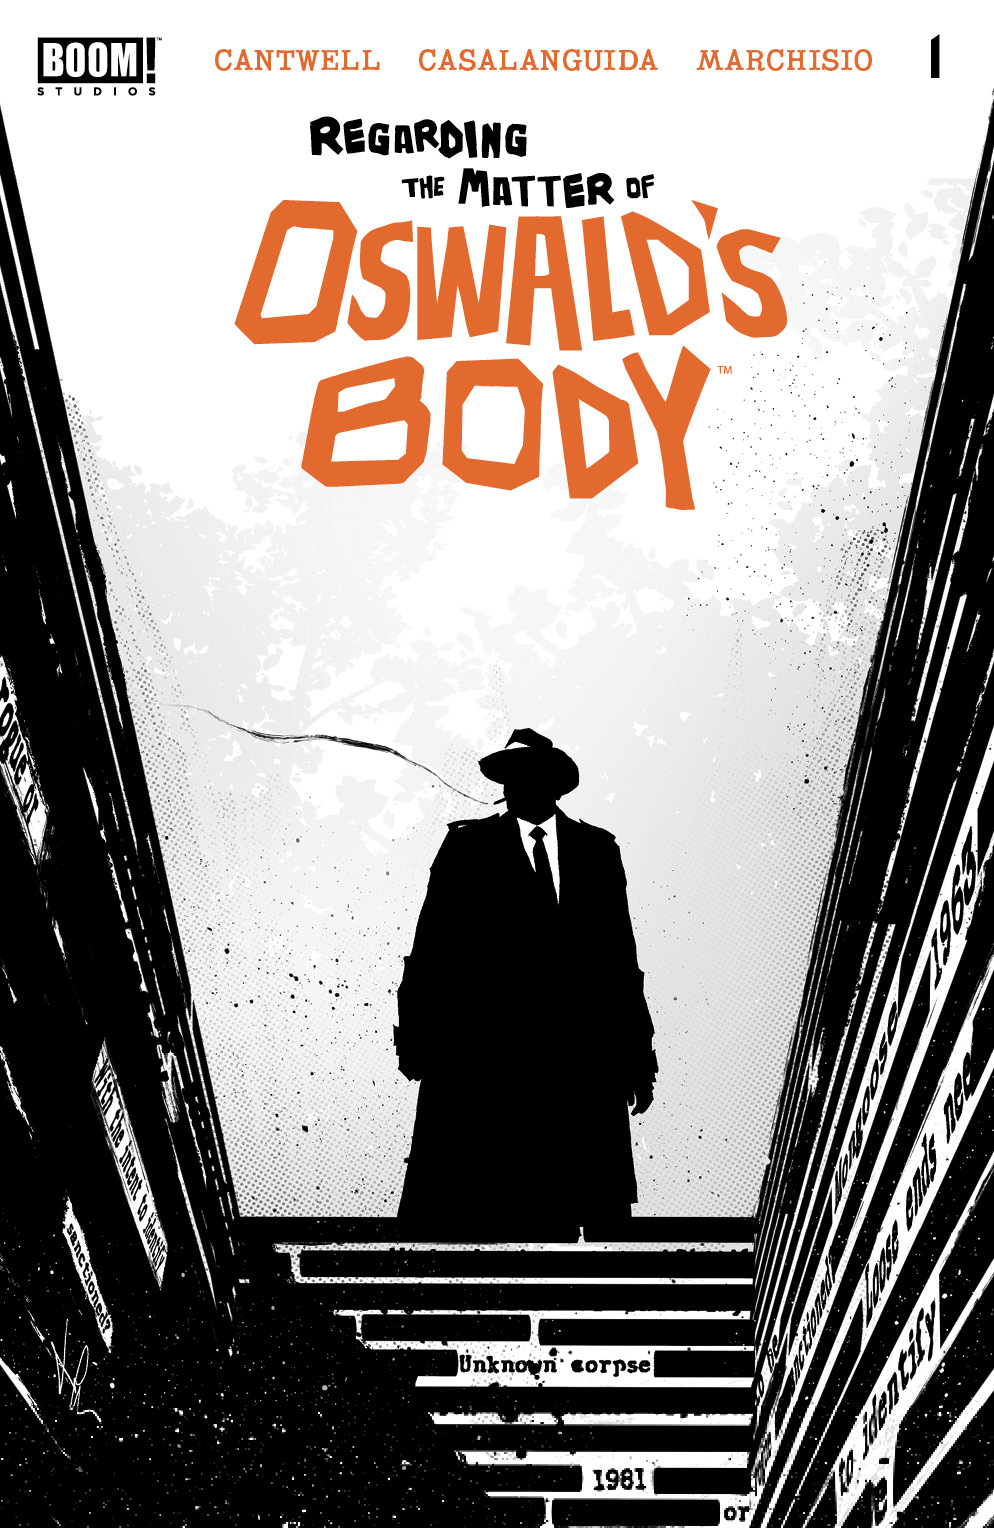 <em>Regarding the Matter of Oswald’s Body</em> | A Conversation with Christopher Cantwell